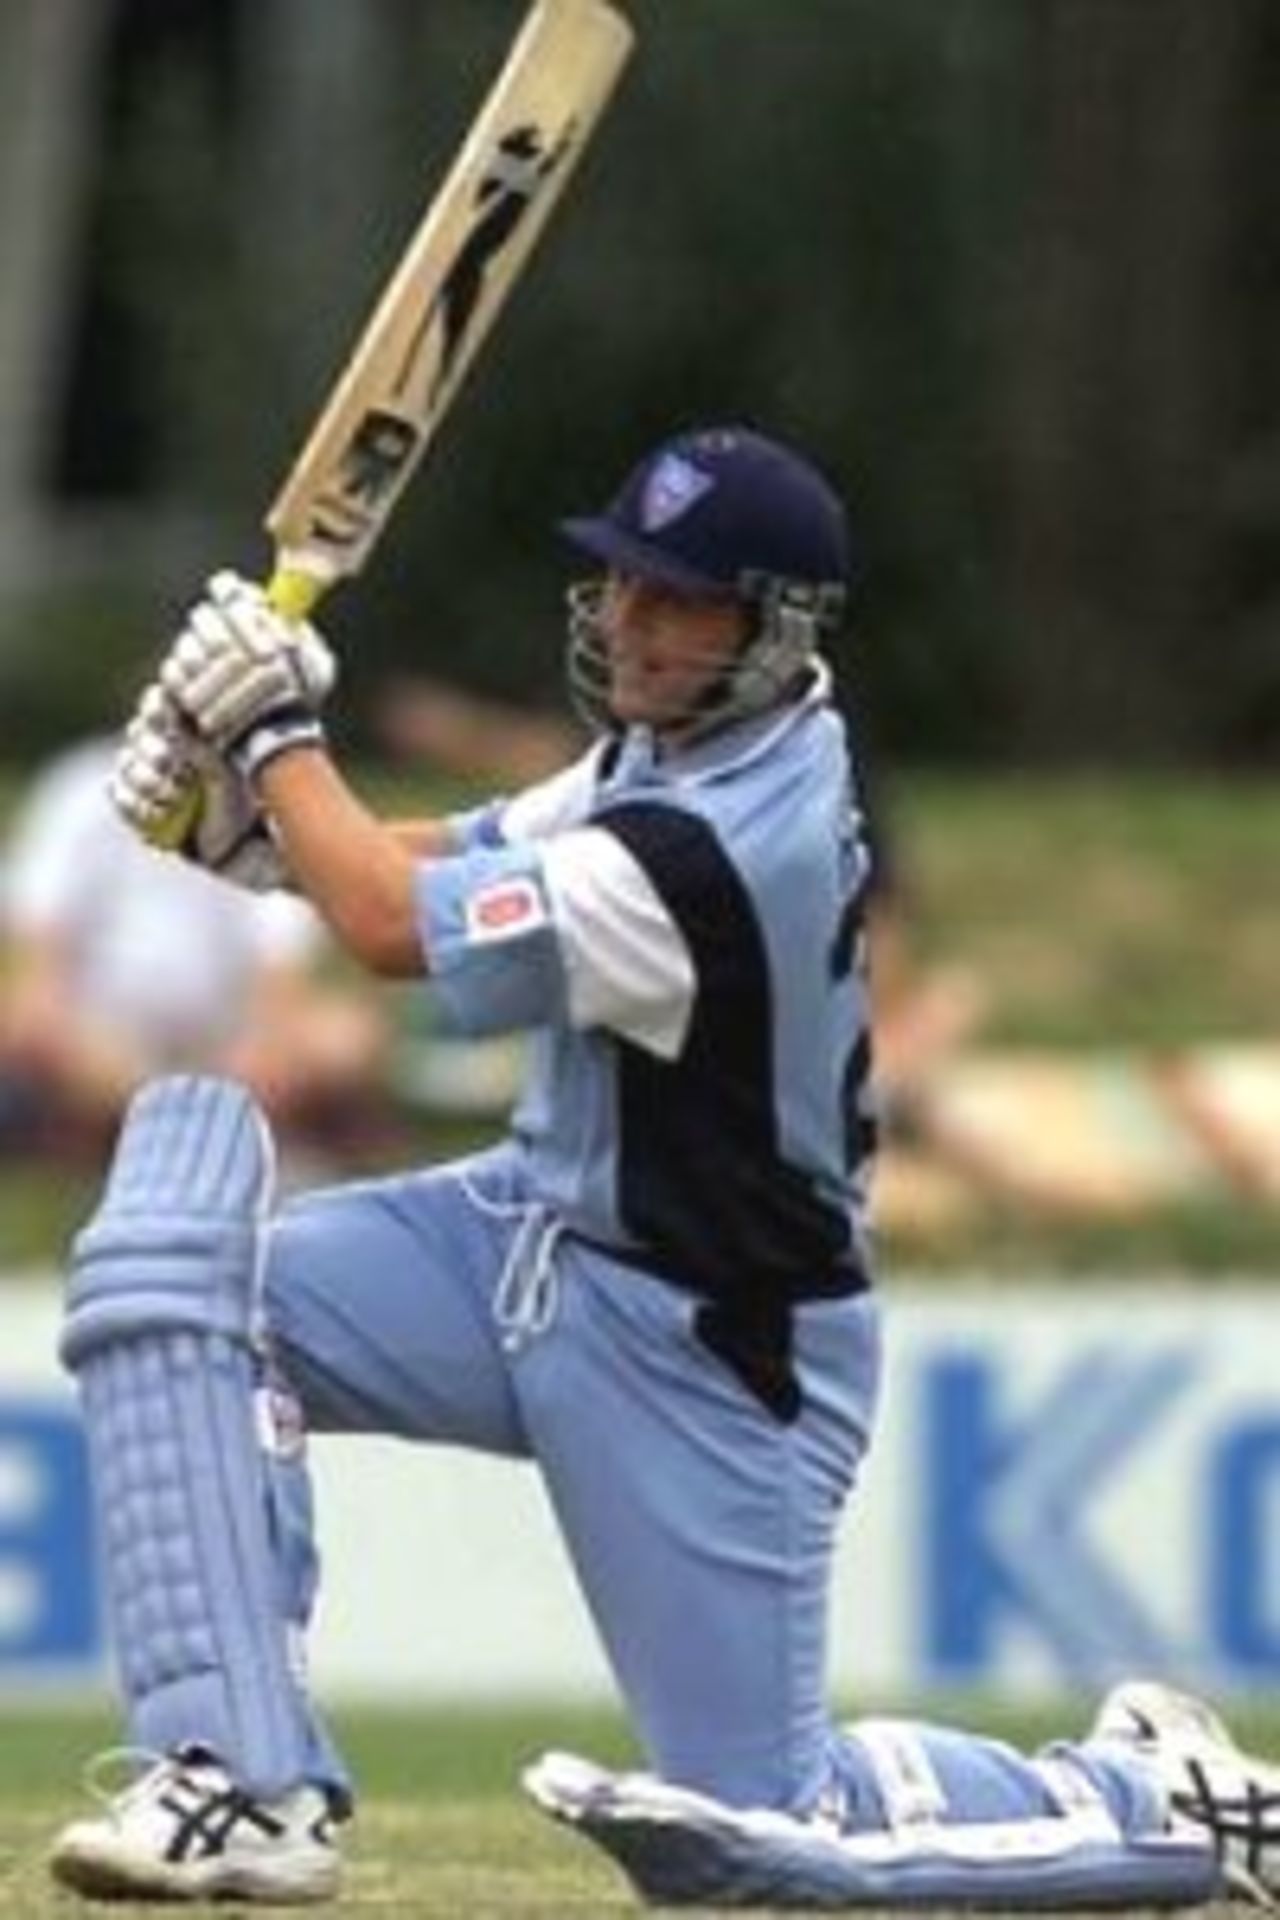 16 Jan 2000: Mark Higgs of NSW Blues in action on his way to top scoring for NSW with 77 runs during the NSW Blues v Canberra Comets Mercantile Mutual Cup game at Manuka Oval, Canberra, Australia.